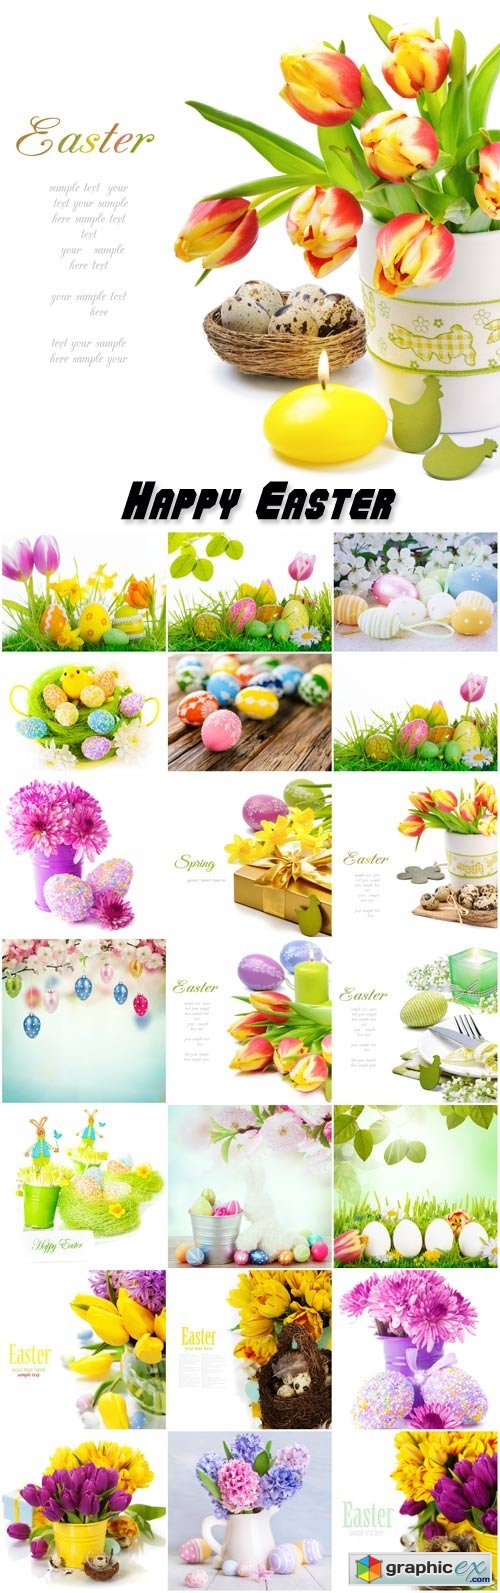 Happy Easter, background Easter compositions